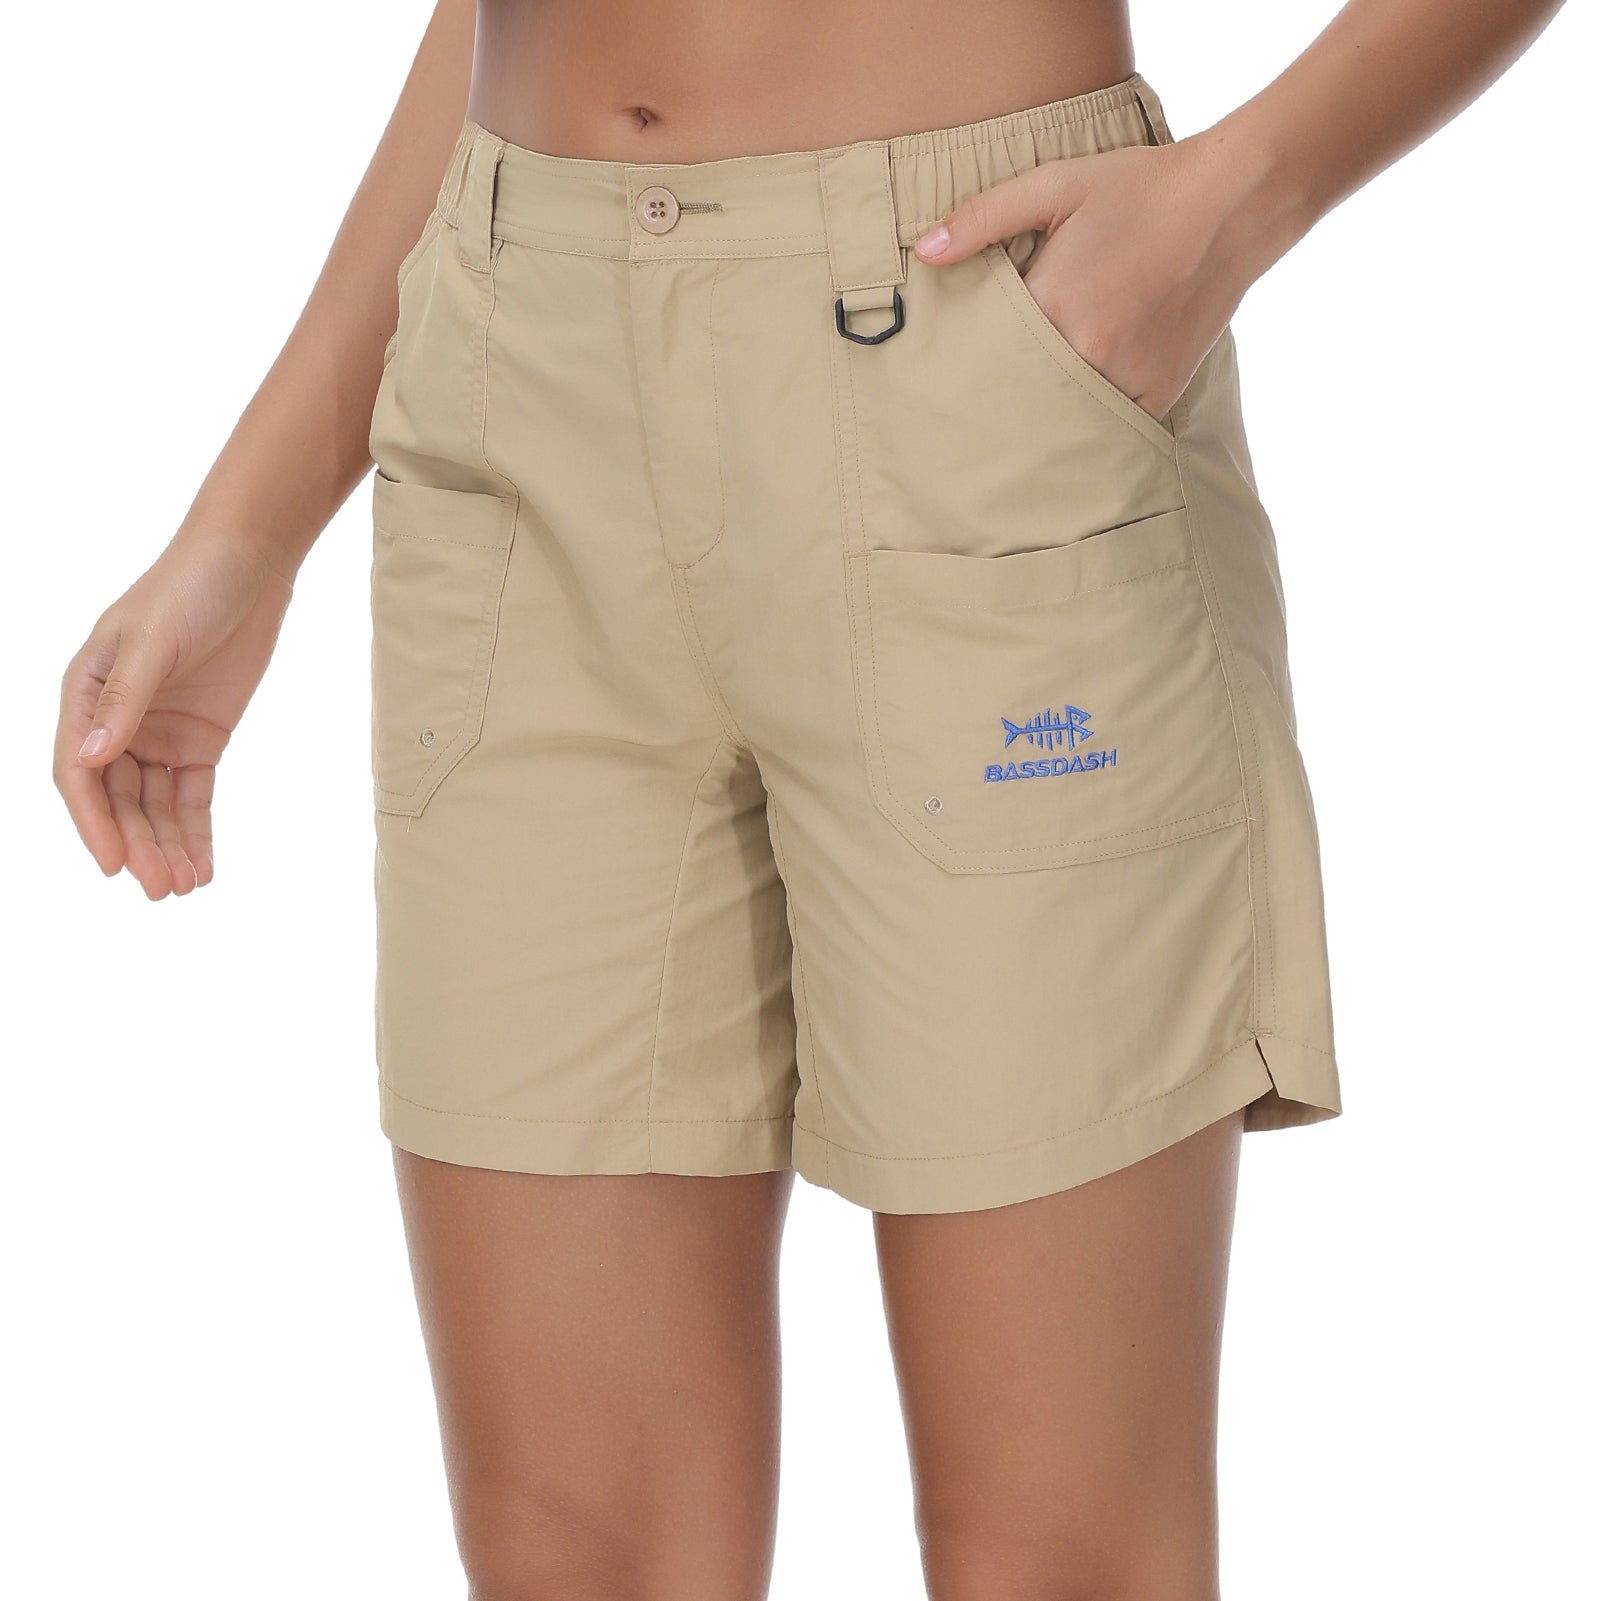 Women's Stretch Twill Shorts,Quick Dry Hiking Athletic Shorts with